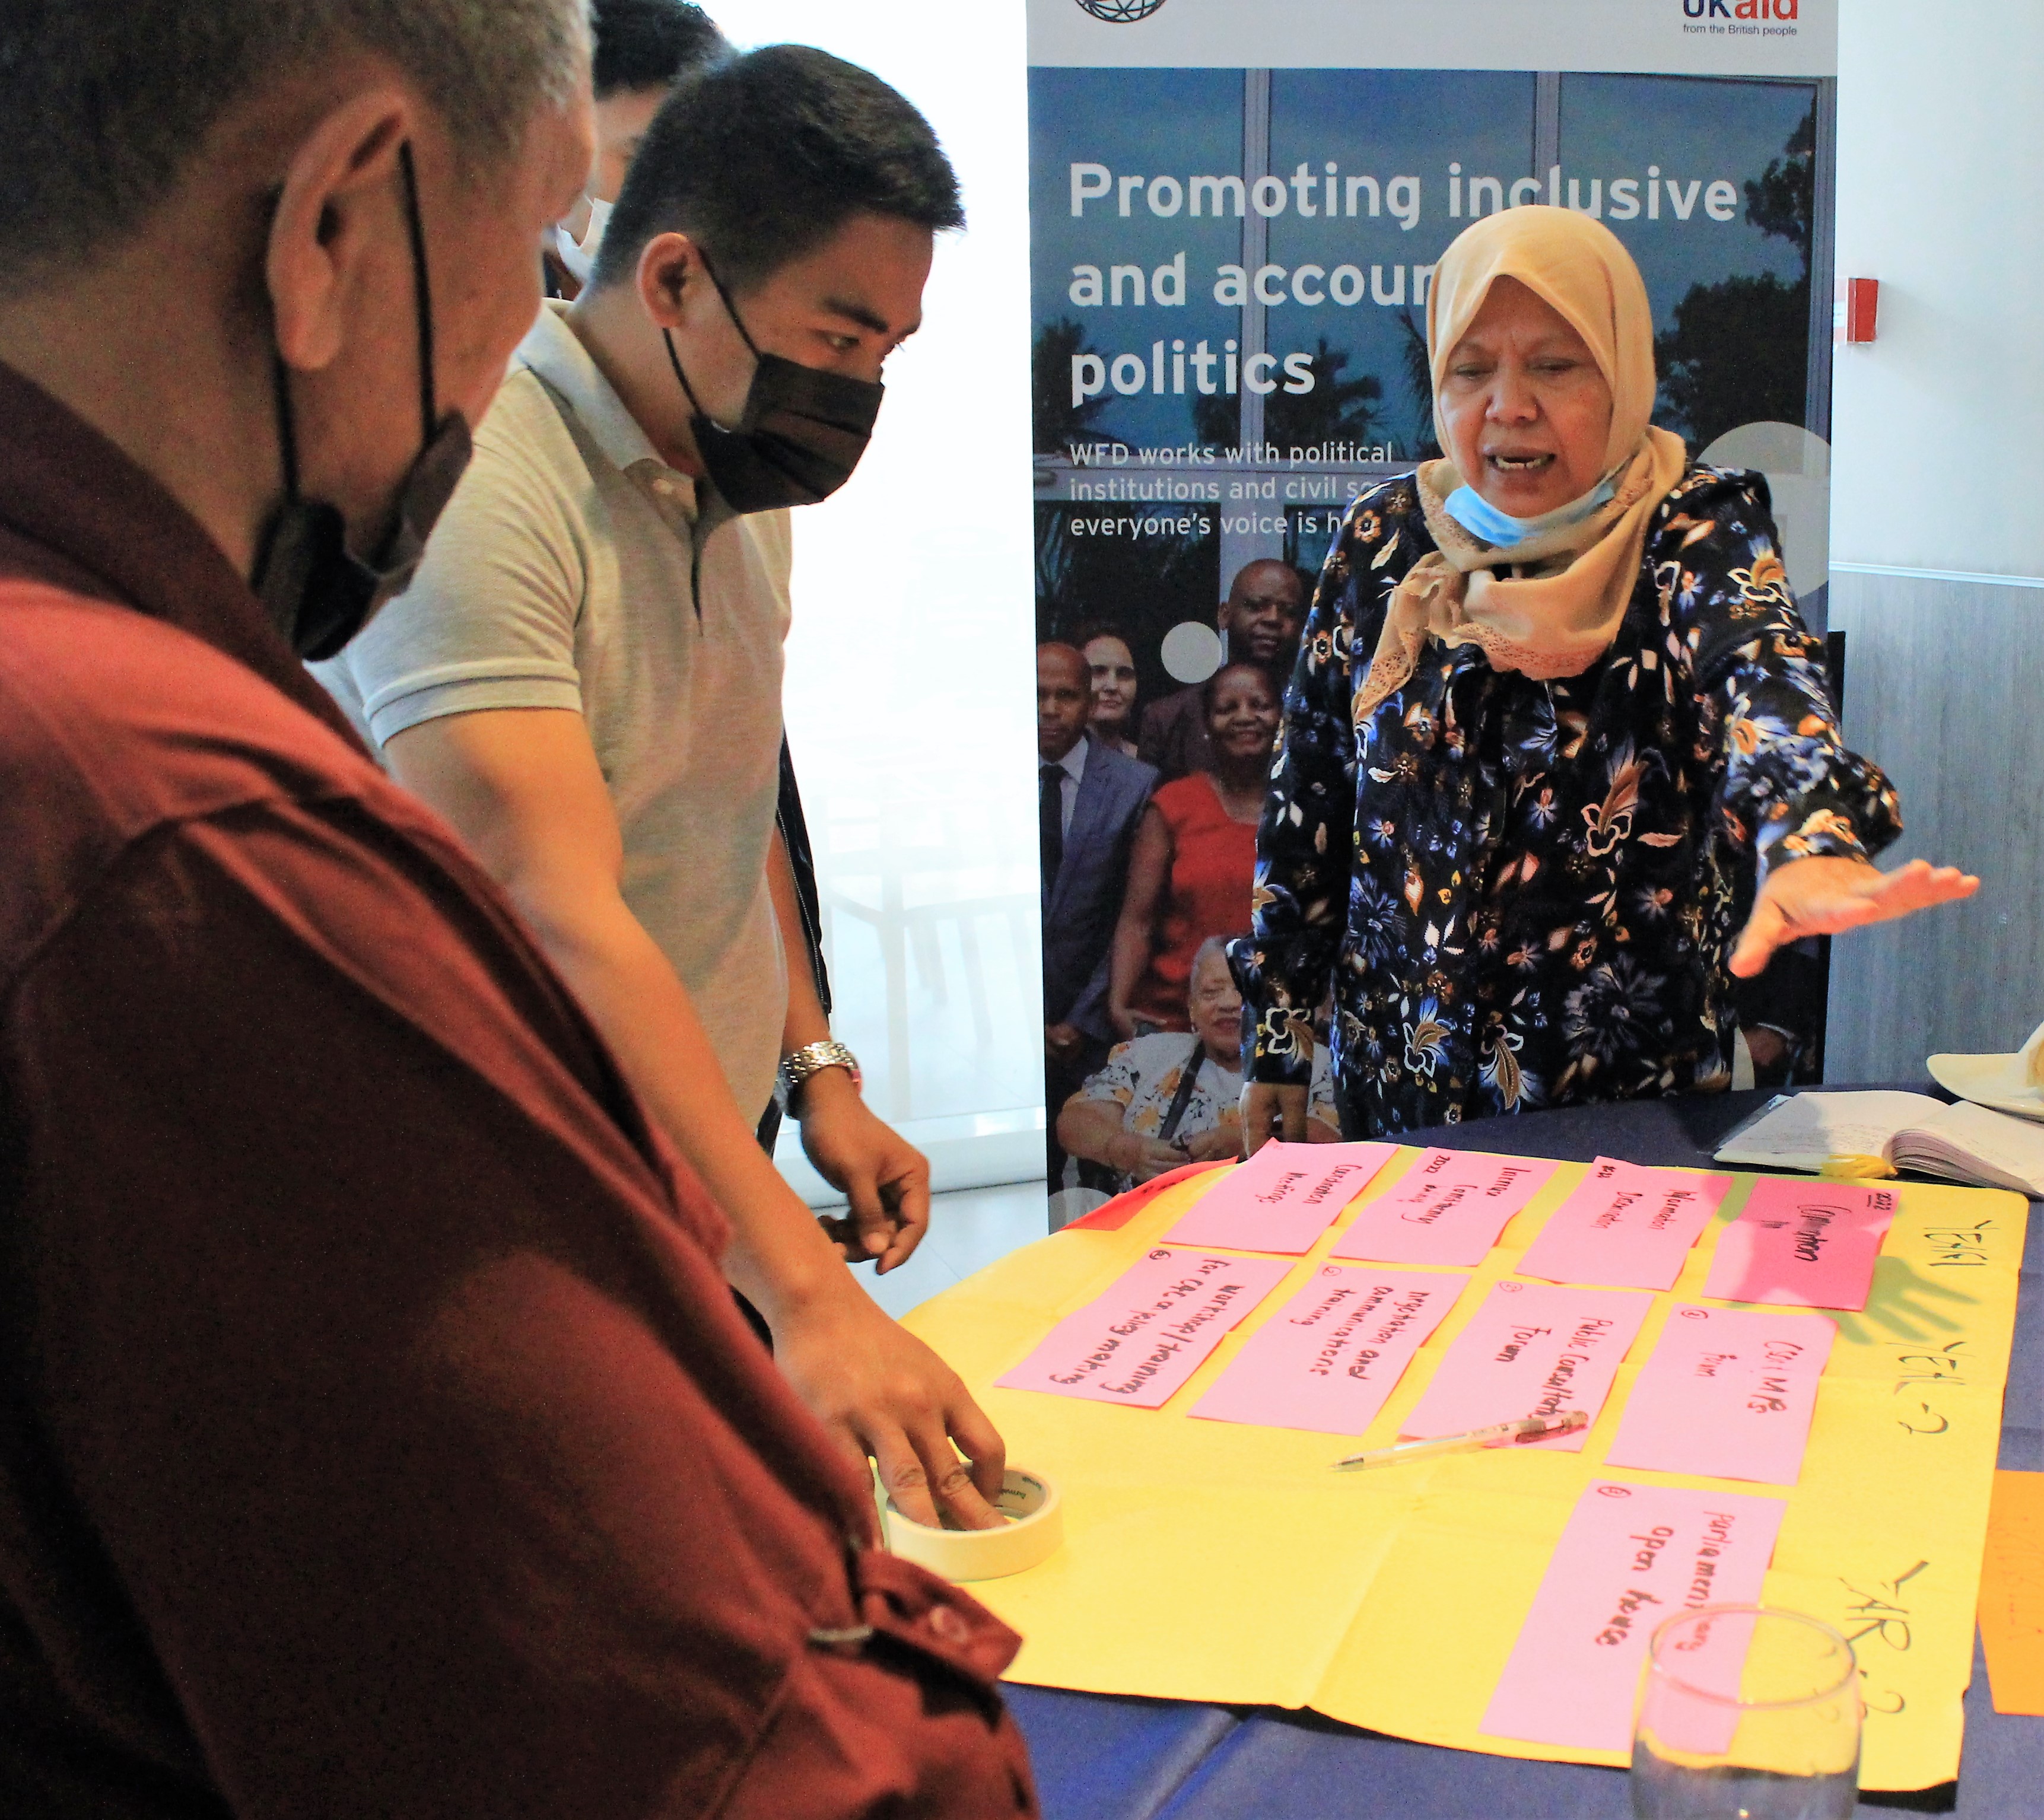 A woman wearing a headscarf stands speaking in front of a table of post-it-notes. Two men in face masks listen with concentrated expressions